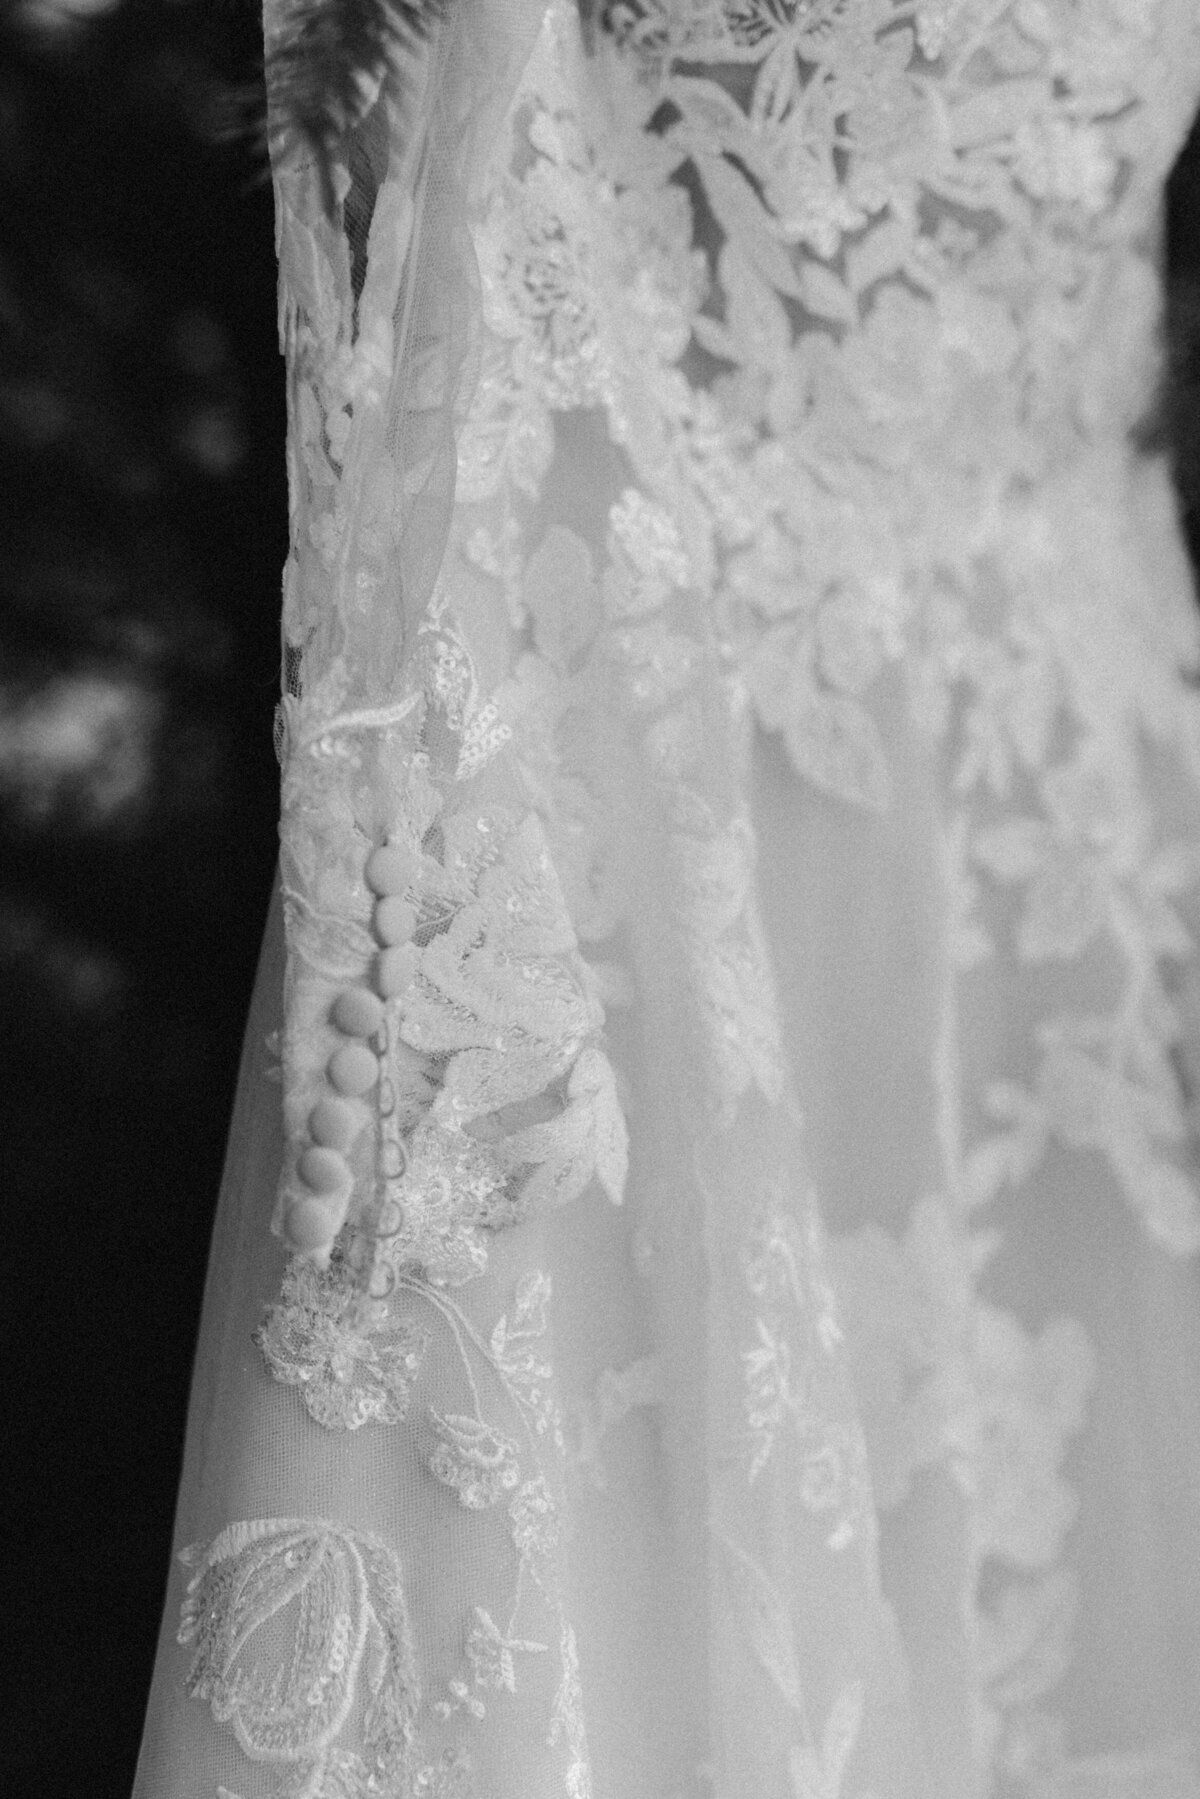 close up black and white photo of a wedding dress